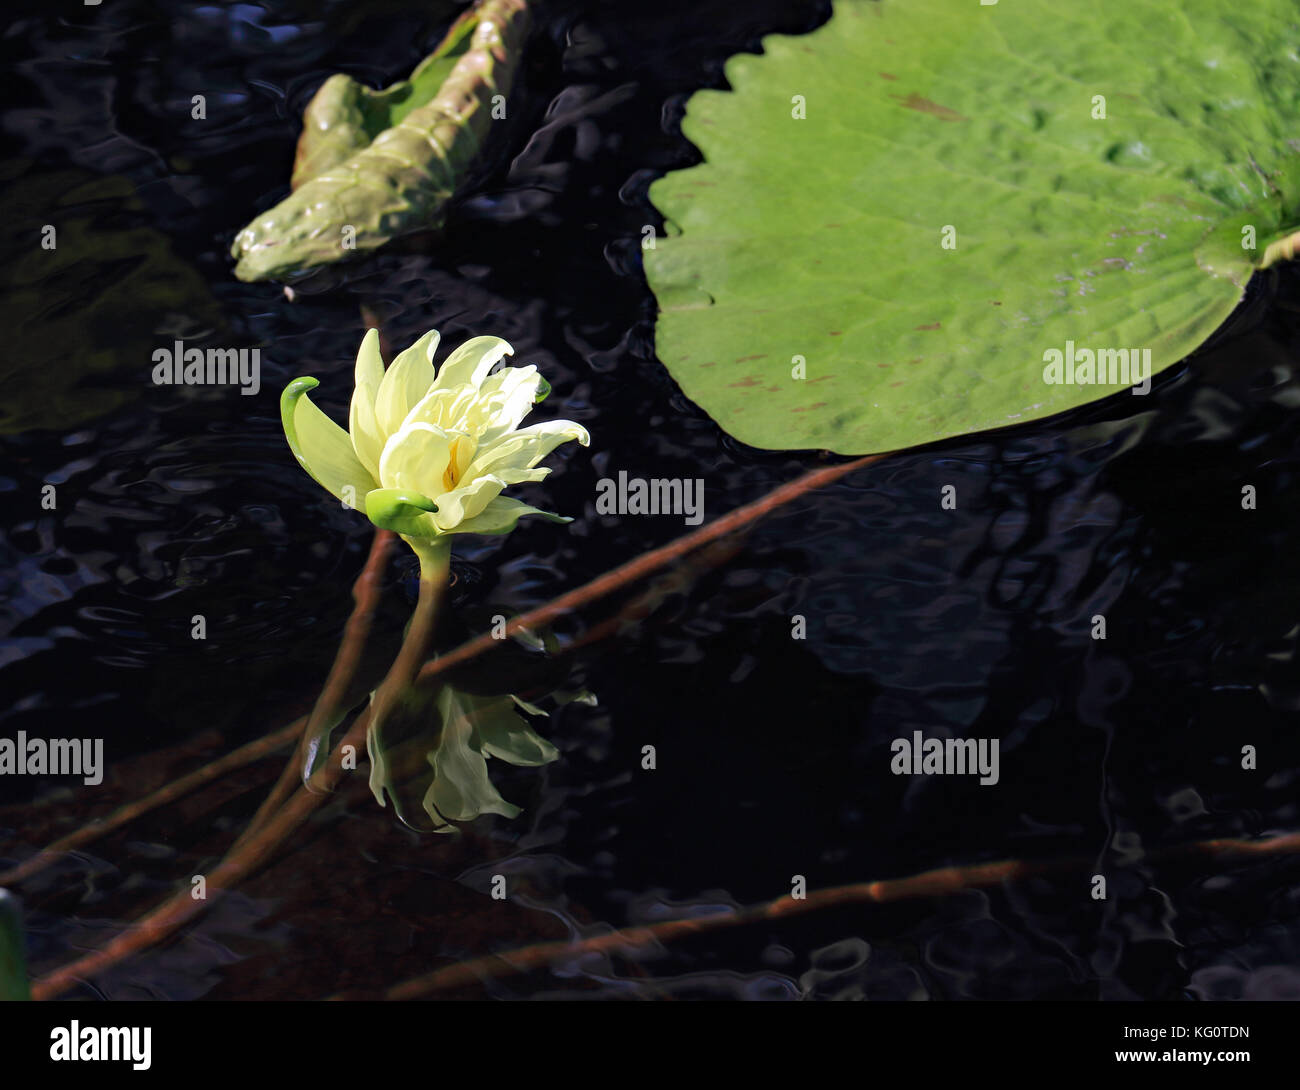 The dramatic dark water background and its deep reflection just adds to the vibrance of this water lily on a pond Stock Photo